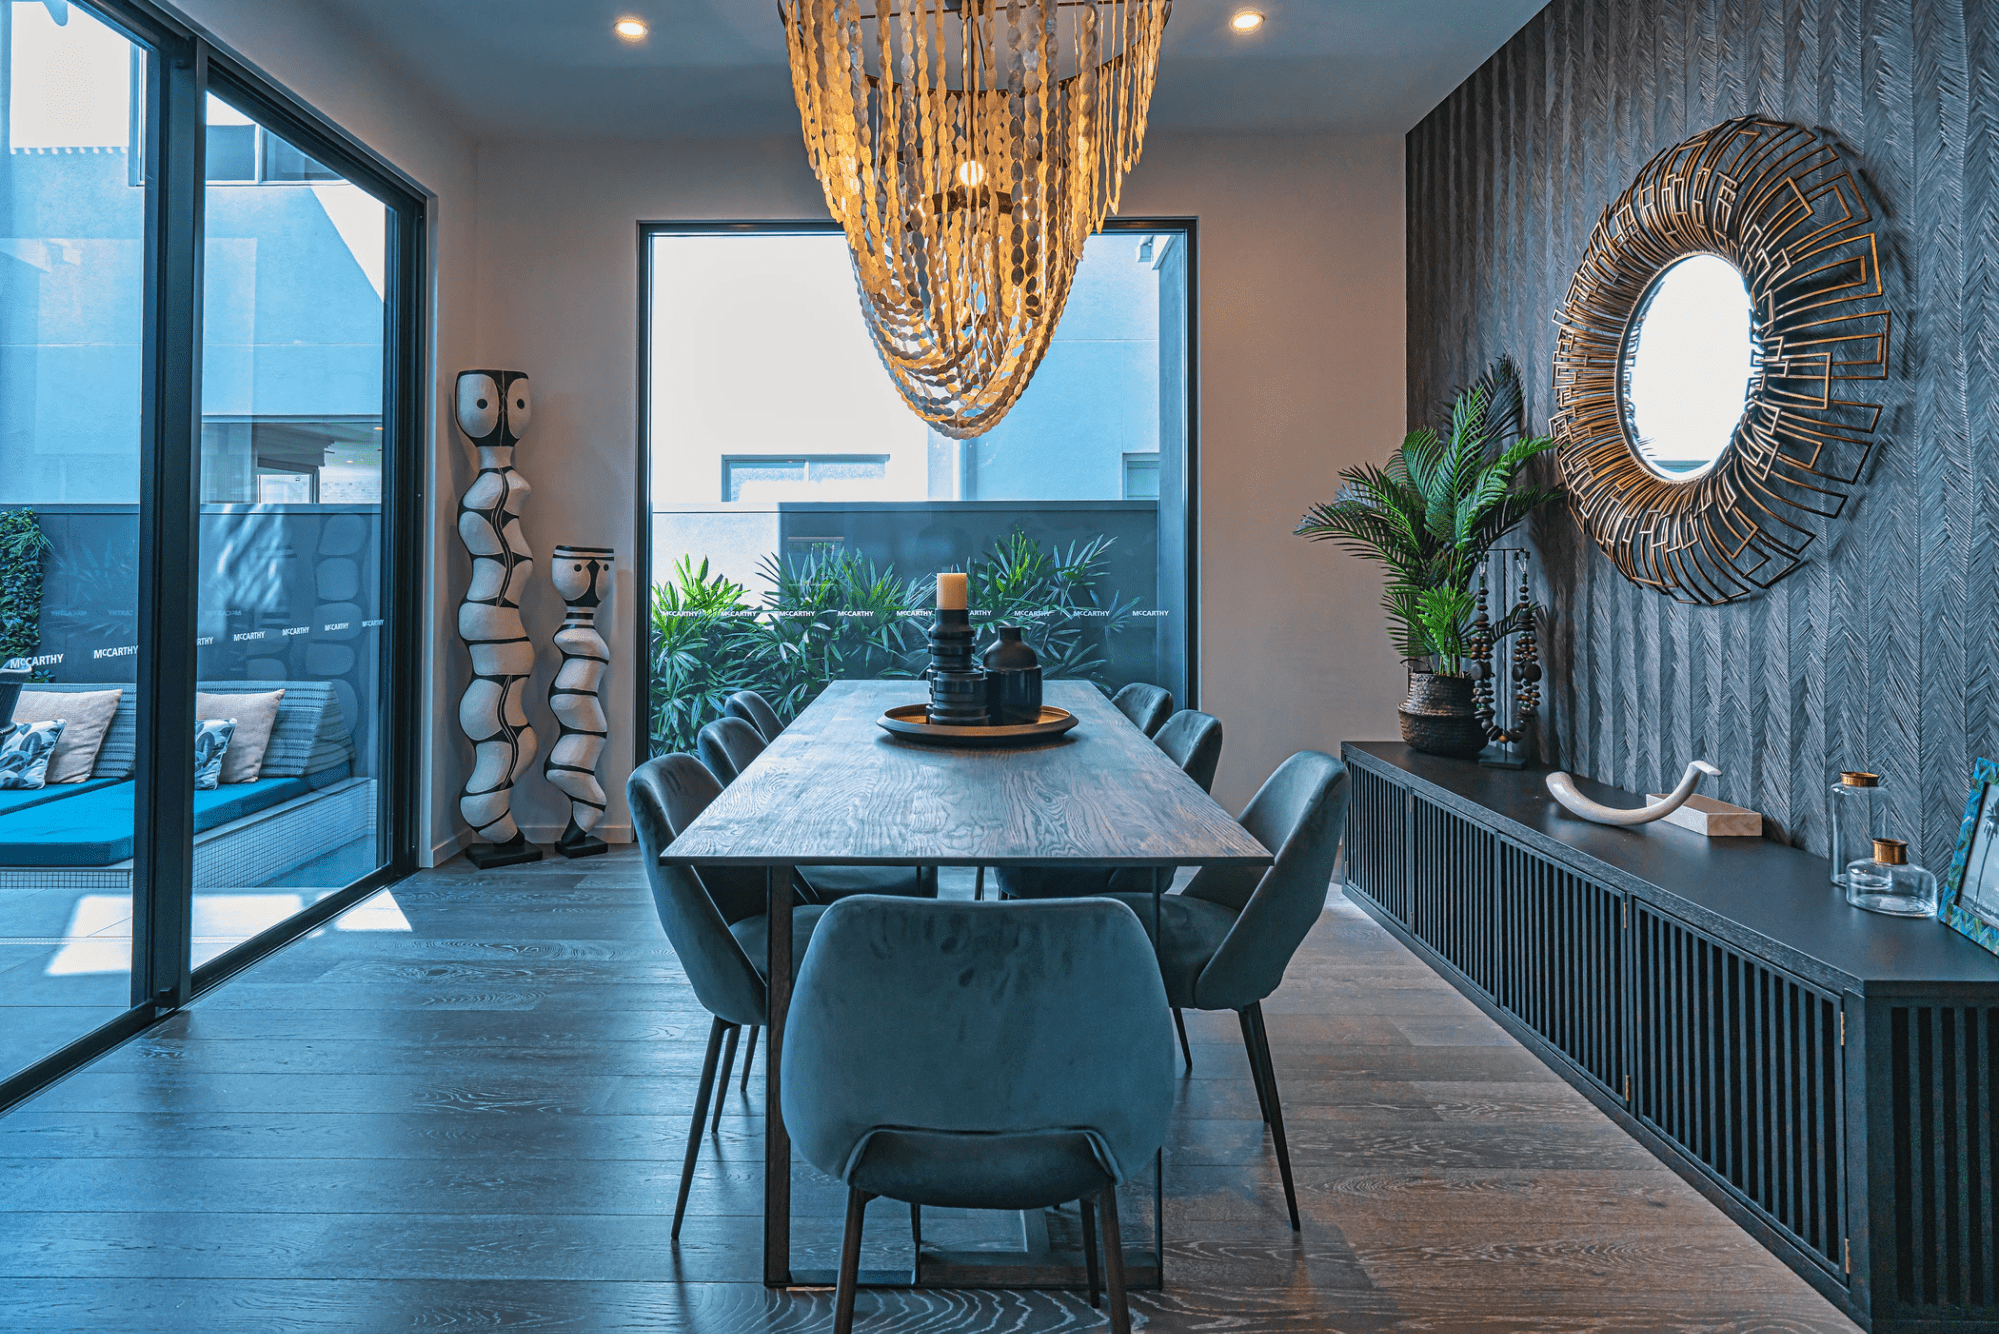 Modern dining room design with eclectic decorations